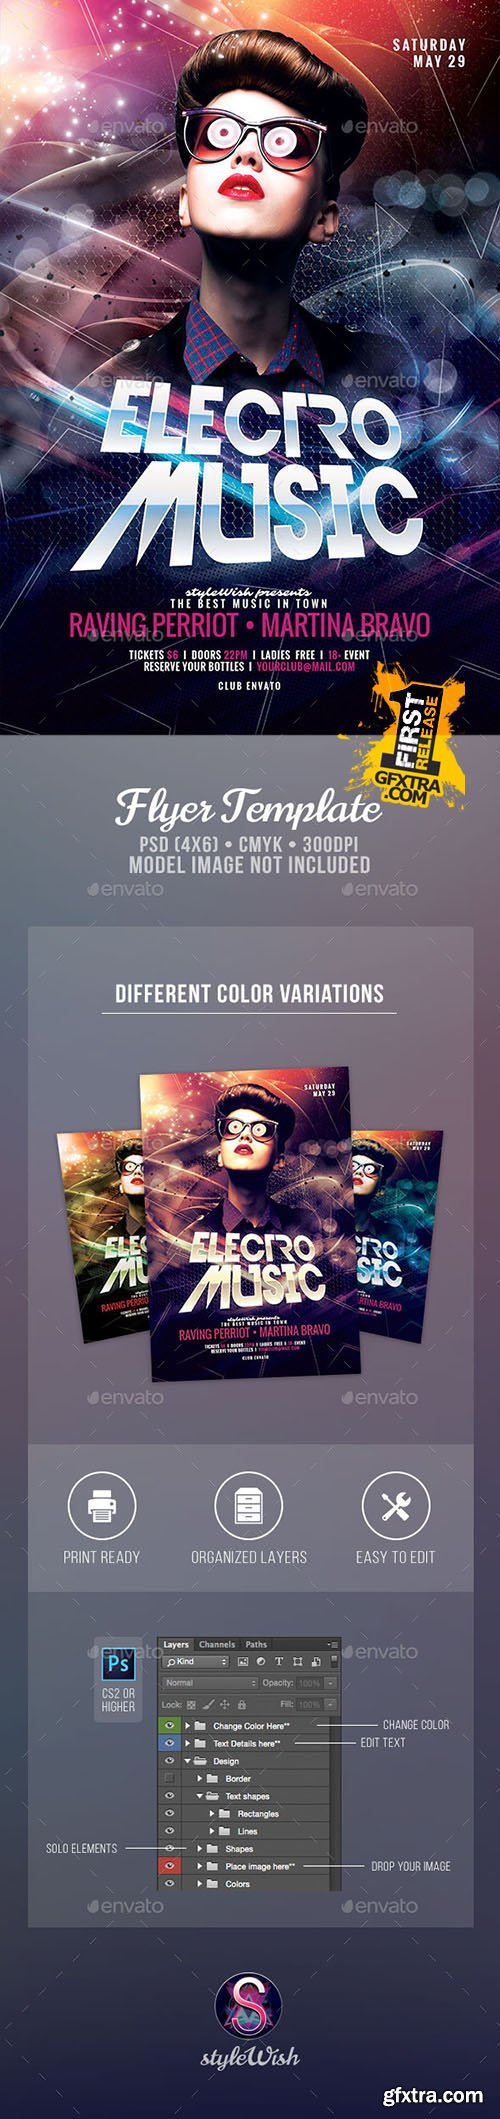 GraphicRiver Electro Music Flyer